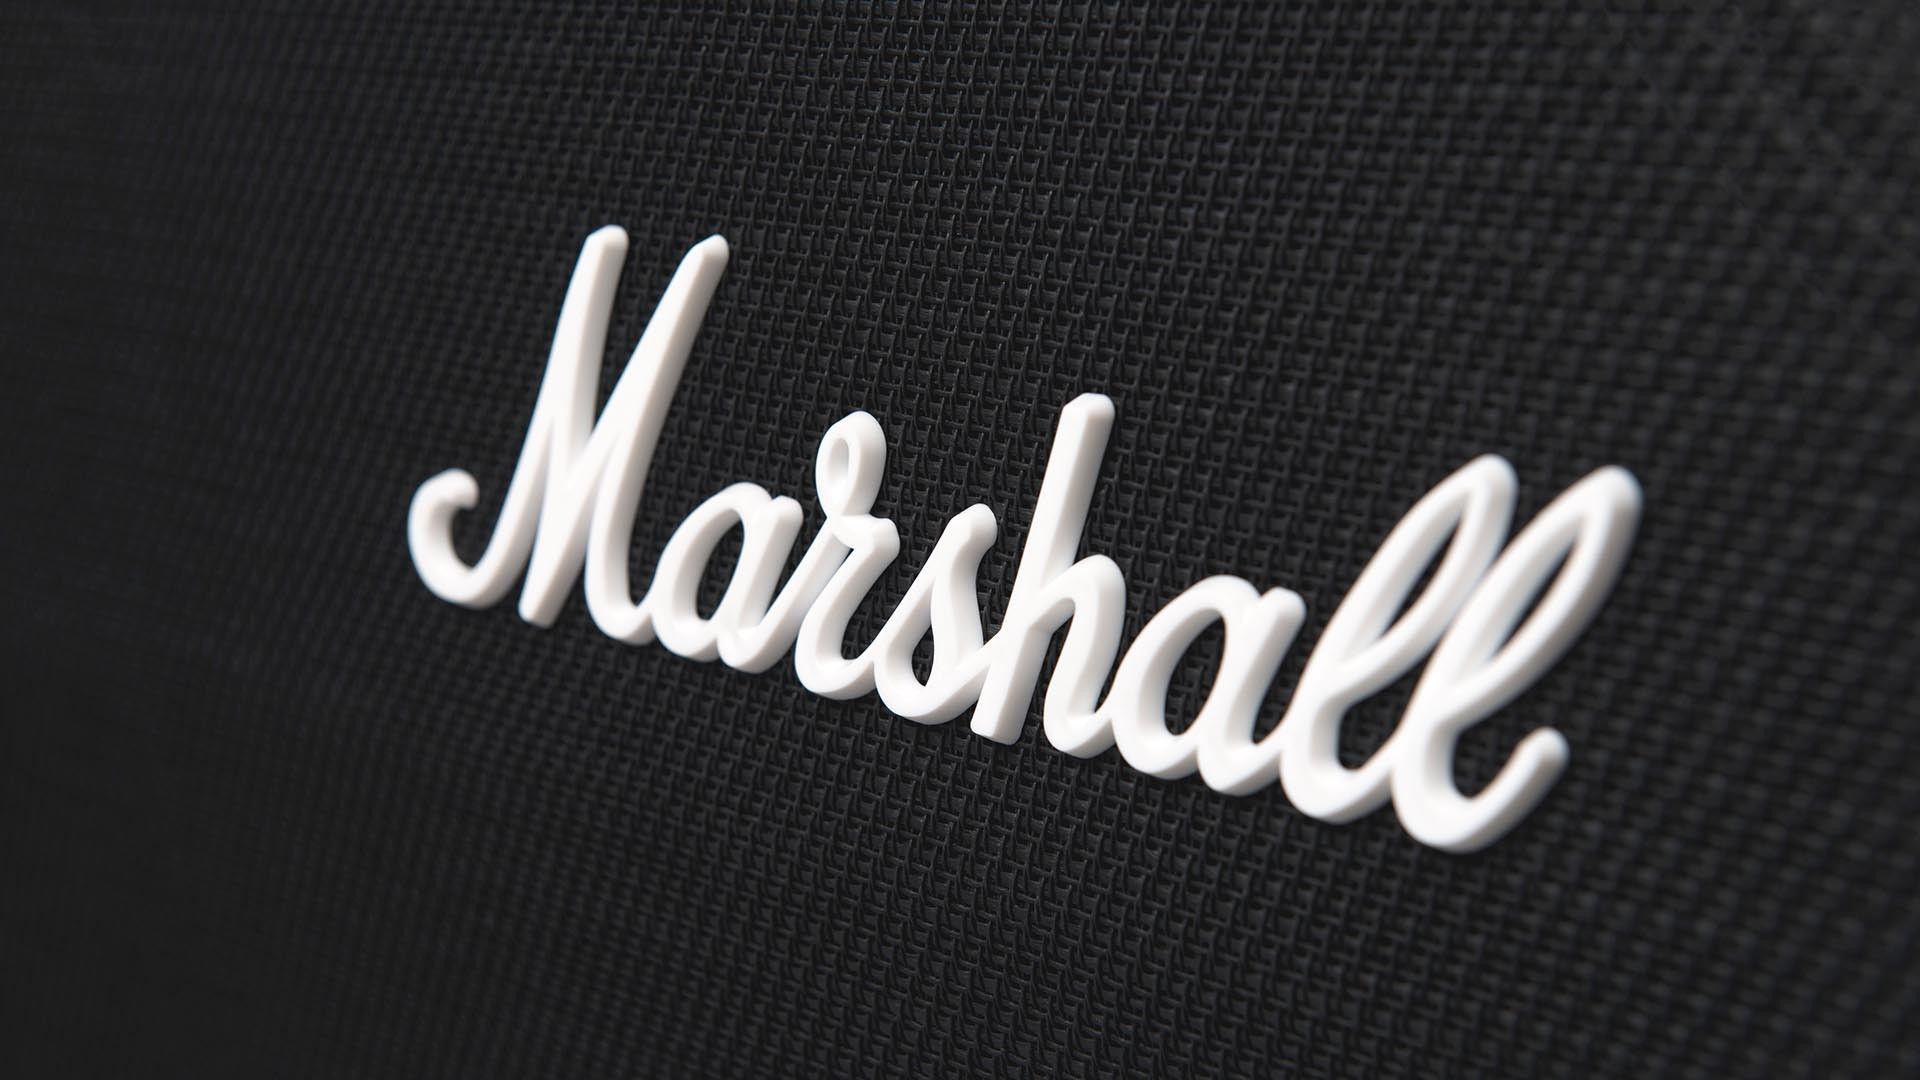 Marshall Wallpapers - Wallpaper Cave